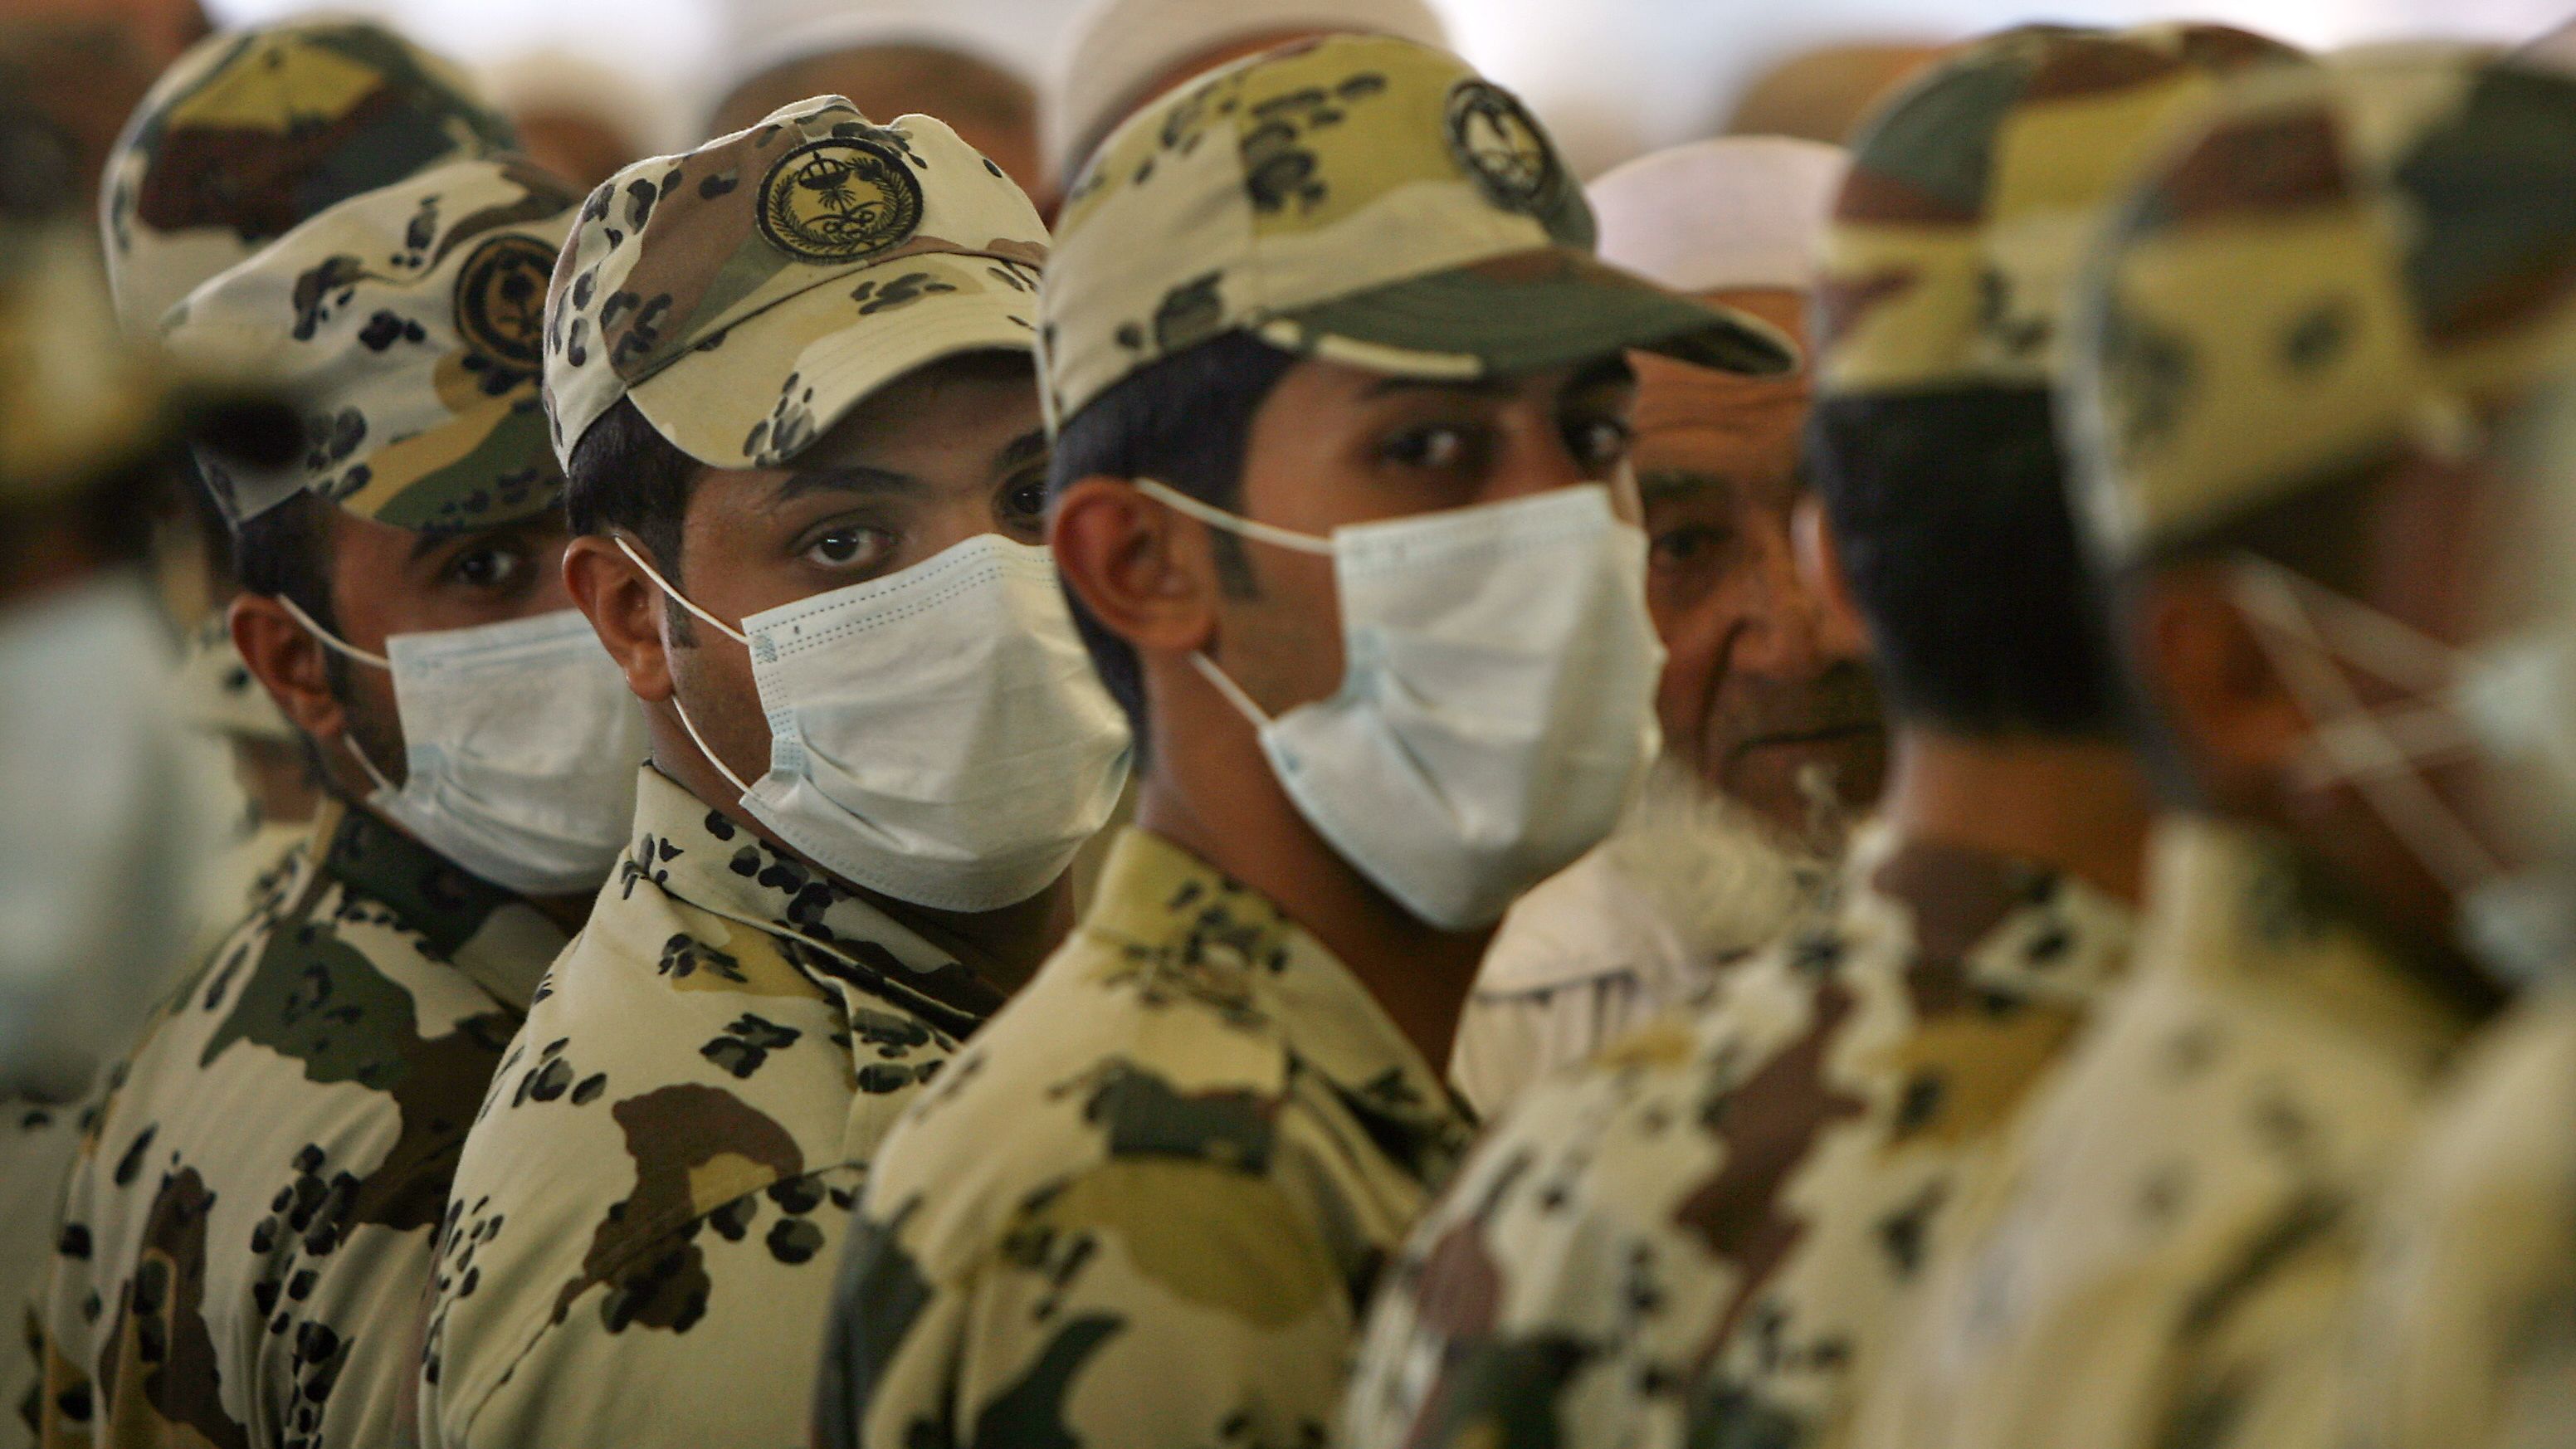 Saudi policemen, wearing protective masks against swine flu, stand guard near the holy city of Mecca on November 28, 2009.